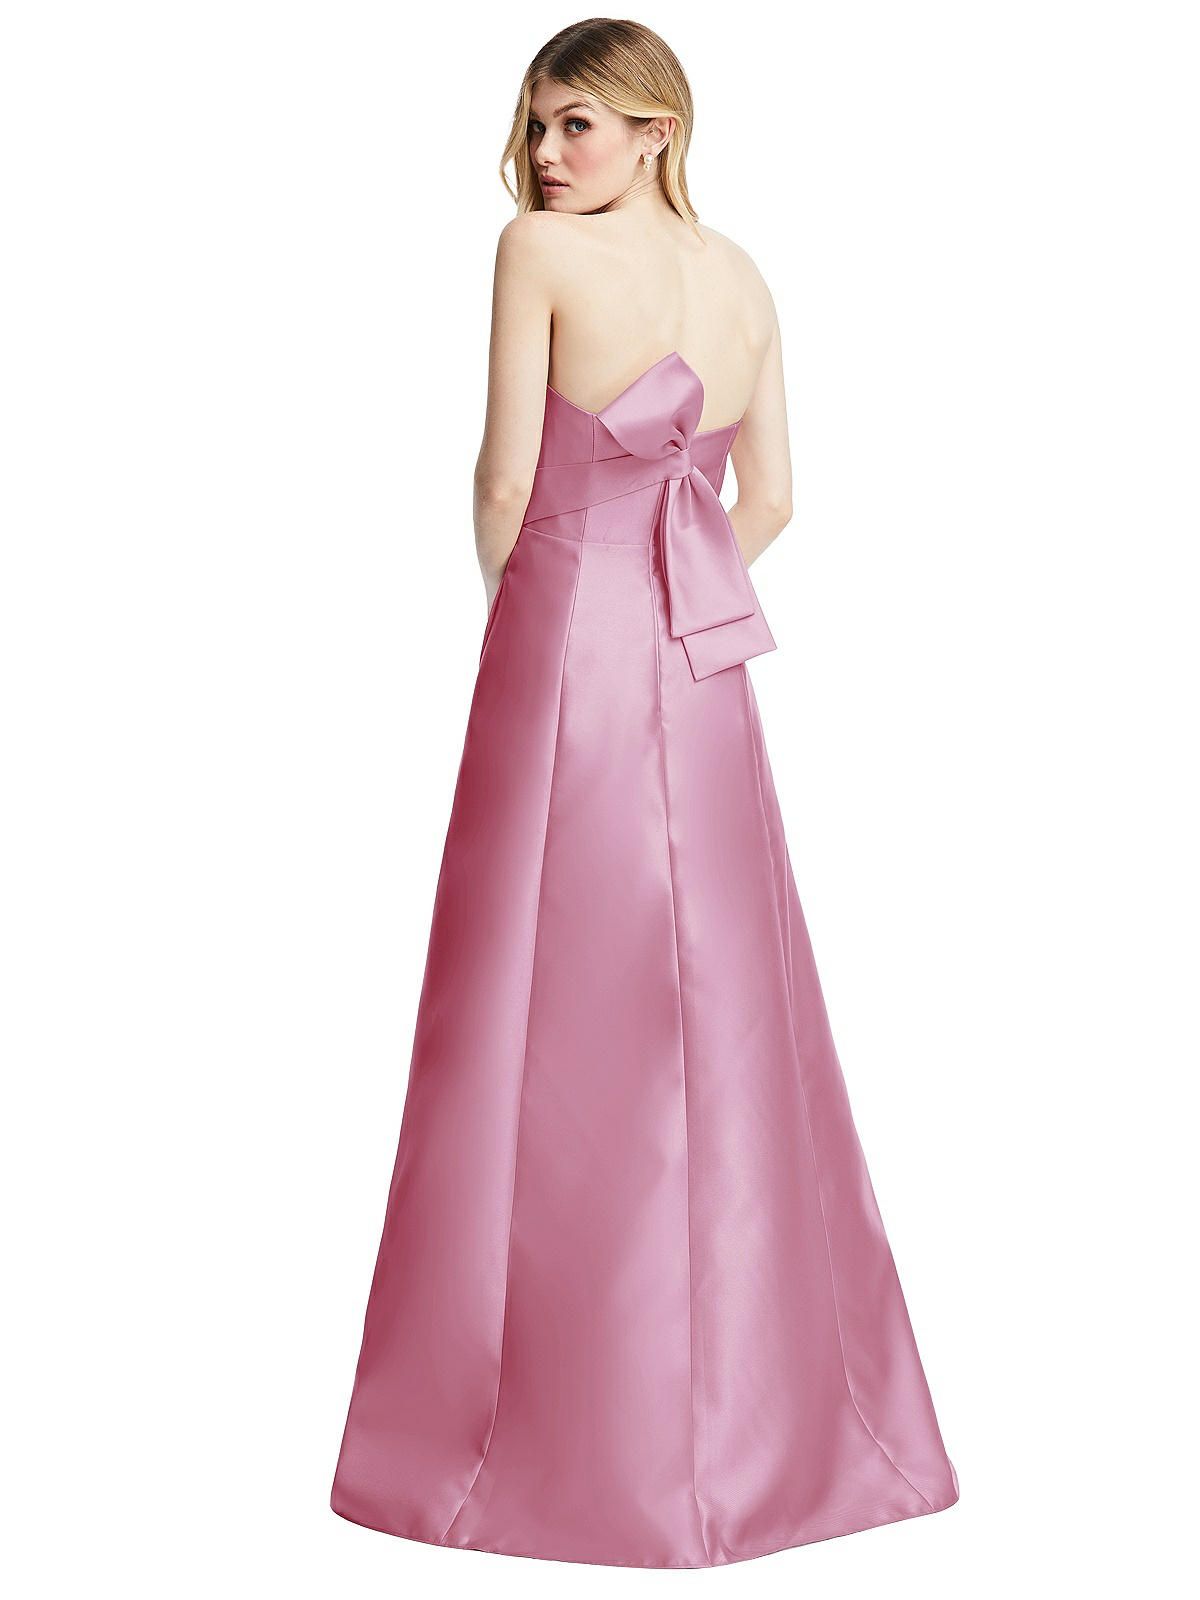 Strapless A-line Satin Gown with Modern Bow Detail | The Dessy Group